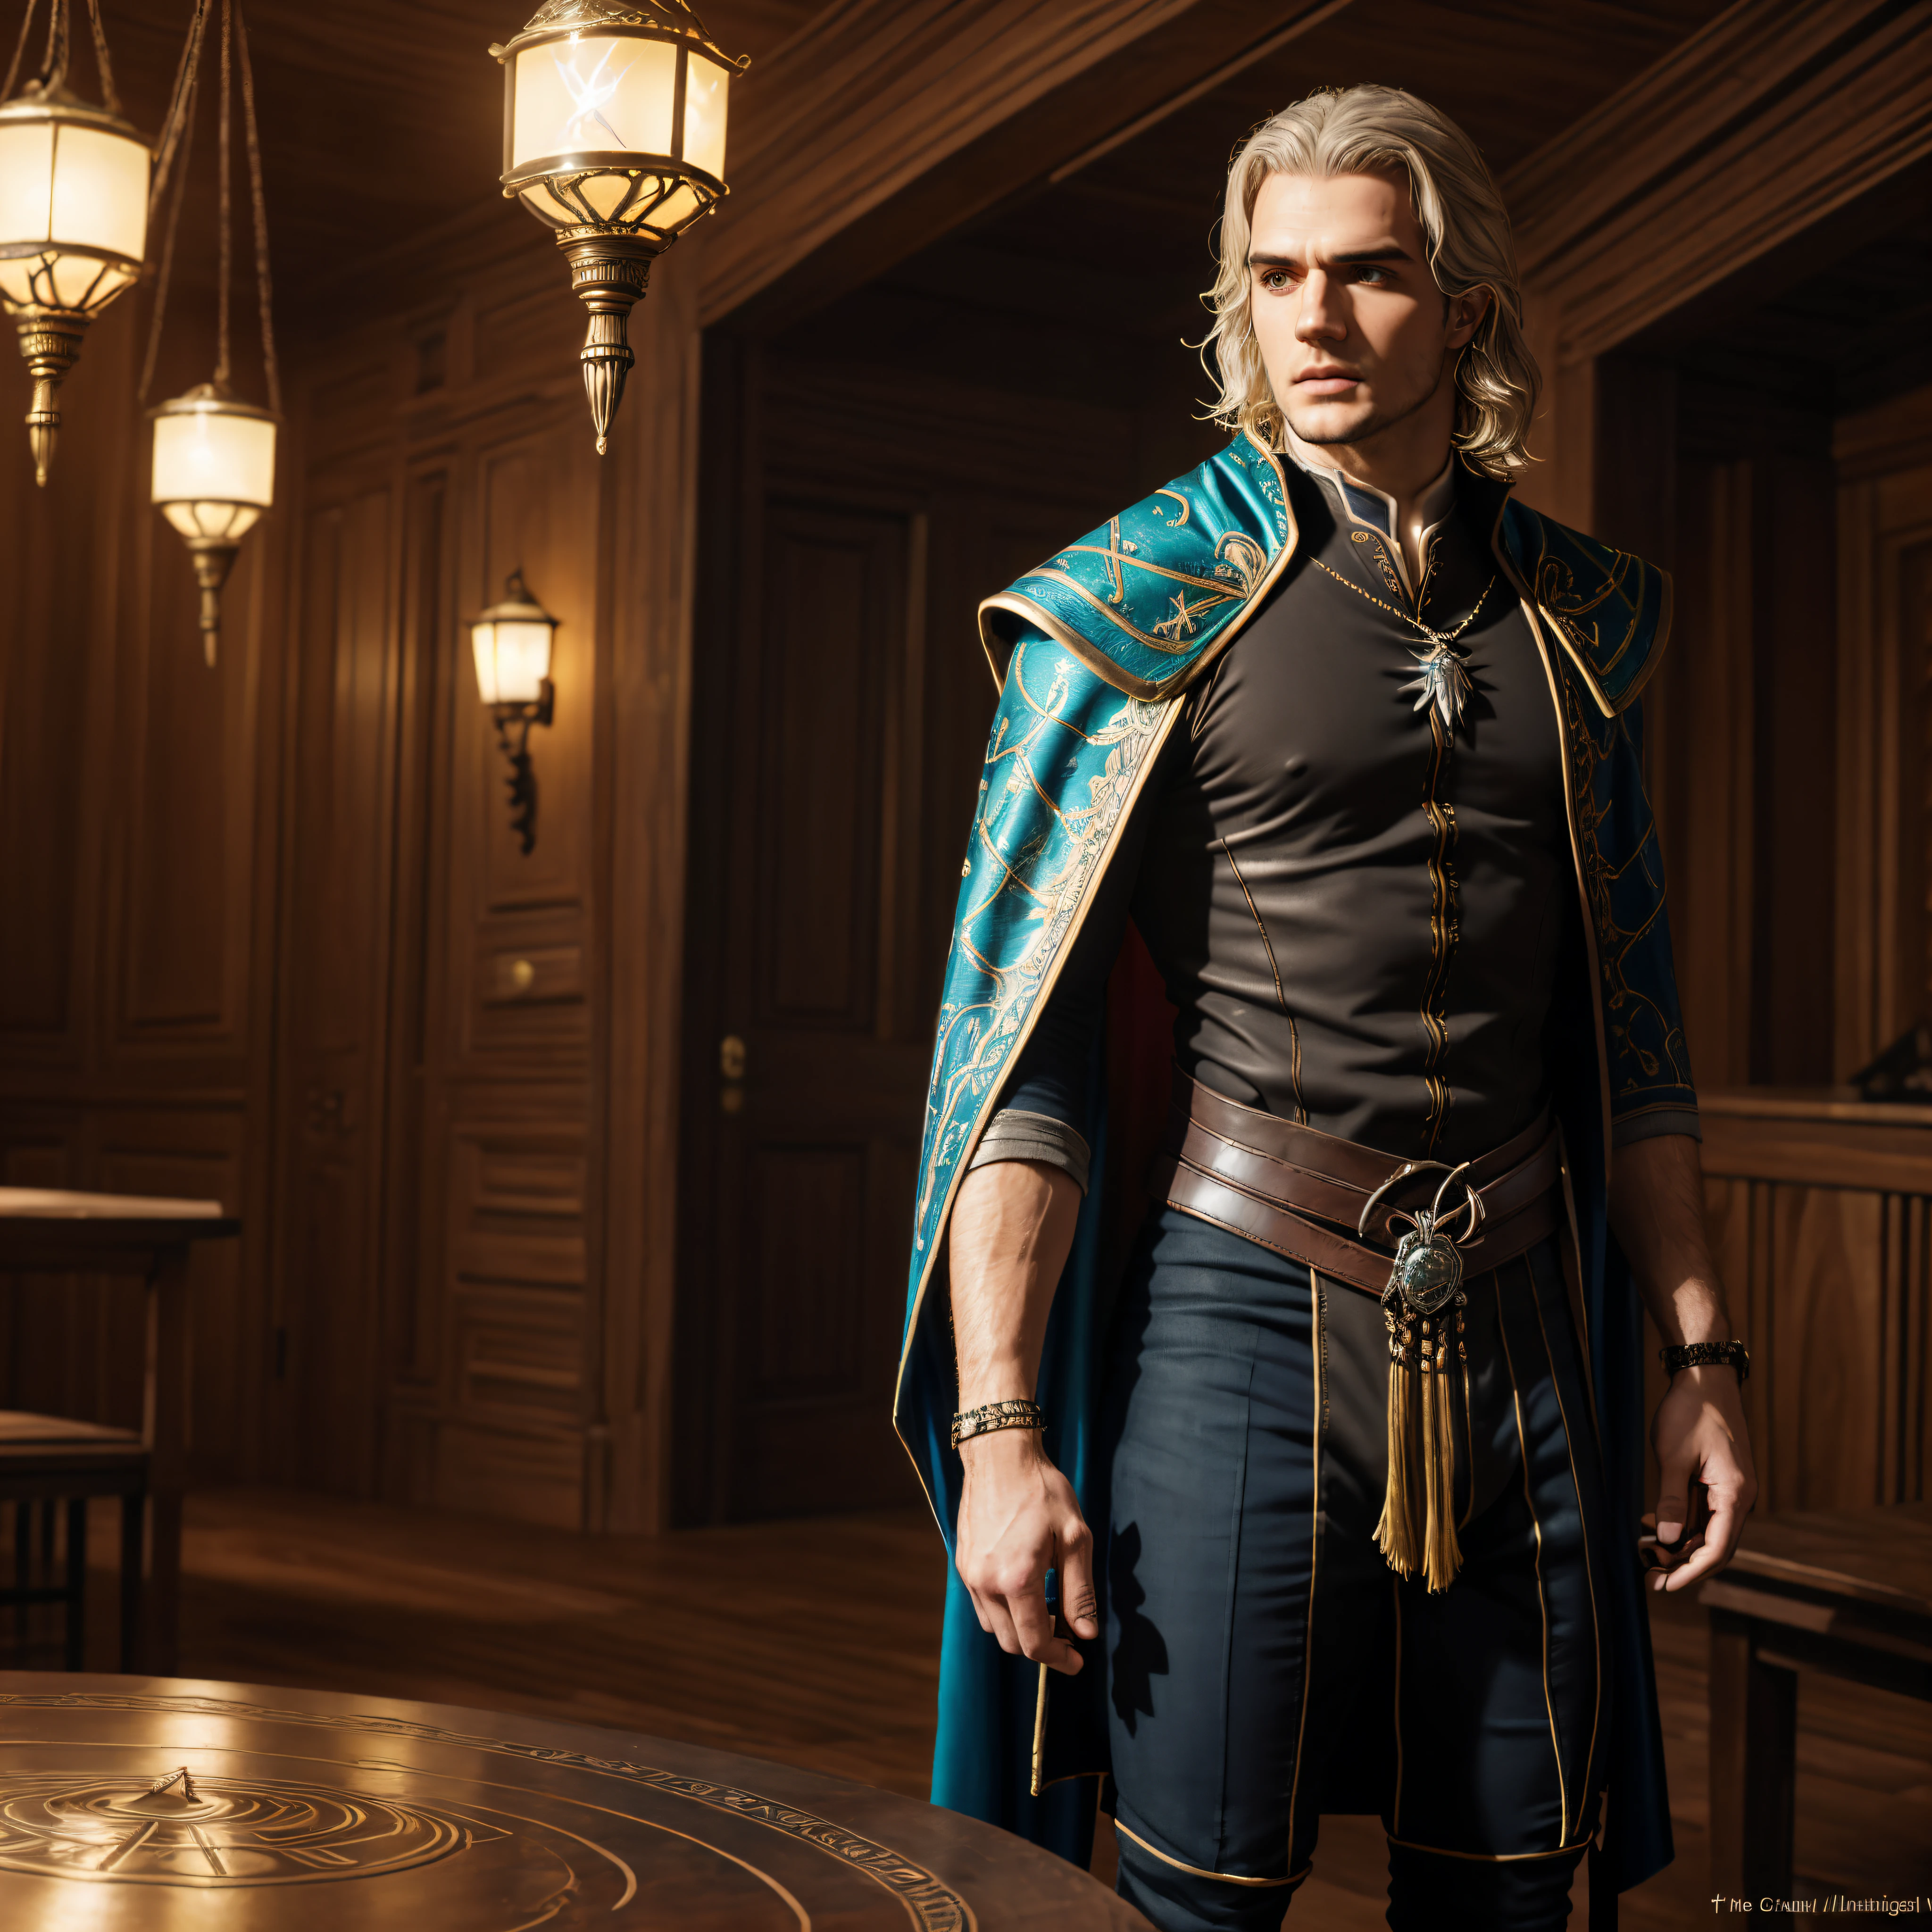 Henry_Cavill as The_Witcher Geralt_de_Rivia chef-d&#39 Van_Gogh Masterpiece ultra UnrealEngine5 Cinematic Kingdom deep path castle equirectangular Urban meticulously intricate ultra_high-details ultra_high-res ultra pro-Photorealistic ultra_high-quality ultra_sharpness focus accurate max perfection reflex extreme improved Octane-rendered opengl-shaders glsl-shader UHD XT3 256K 128K K 32K 16K 8K DSLR HDR romm rgb pbr ombre analogique color-coded shading 3DCG fxaa global illumination cgi vfx sfx fkaa txaa rtx ssao post-processing post-production cell-shading augmented tone-mapping sundrop contre-jours optimal sunLight luminescence volumetric lightning contrast "Heavy Metal" theater Will-o'-the-wisp Divine synthetic headgear "singning" micro gold God dazzling Cosplay Admiral Fancy Vivid Yellow jukebox Symmetrical ((King Athletic muscular extatique Tamned Skin gorgeous sensual Effects Cheekbones Embarrassed redderer eye-liner saphirs saturate ultra_beautiful_eyes dark black pupils brown iris lazulis turquoise mouth open tongue teeth obvious smiles howling Floating Jacket Eccentric Cape onyx Shoulders-Off Shirt Lace Clavicles White Papillotes embroidered satin red thick leather felt skirt matching ample swinging spinel navel waist reveal belt-chastity heart diamond padlock silver agate bristles scarlet pubis-hairy indigo silk snap garters thighs legs boots)) dancer nickel fleuraison bees tin incandescentes CGSCOSITY tattoo Cristallines hearth rubis invoque monster bee (EOS R6 135mm 1/1250s f/2.8 ISO400) blast flash blow glow opale straight heavy chrome flat rune lava bands glyphes Tourmaline plasma background floraison beholder chaos strange population Earth outdoor mirror handcuff glass transparent graduated reflection Bruce_Weber sex "luis Royo" naked nsfw varied multi etc. --v 5.2 --s 1000 --c 20 --q 20 --chaos 100